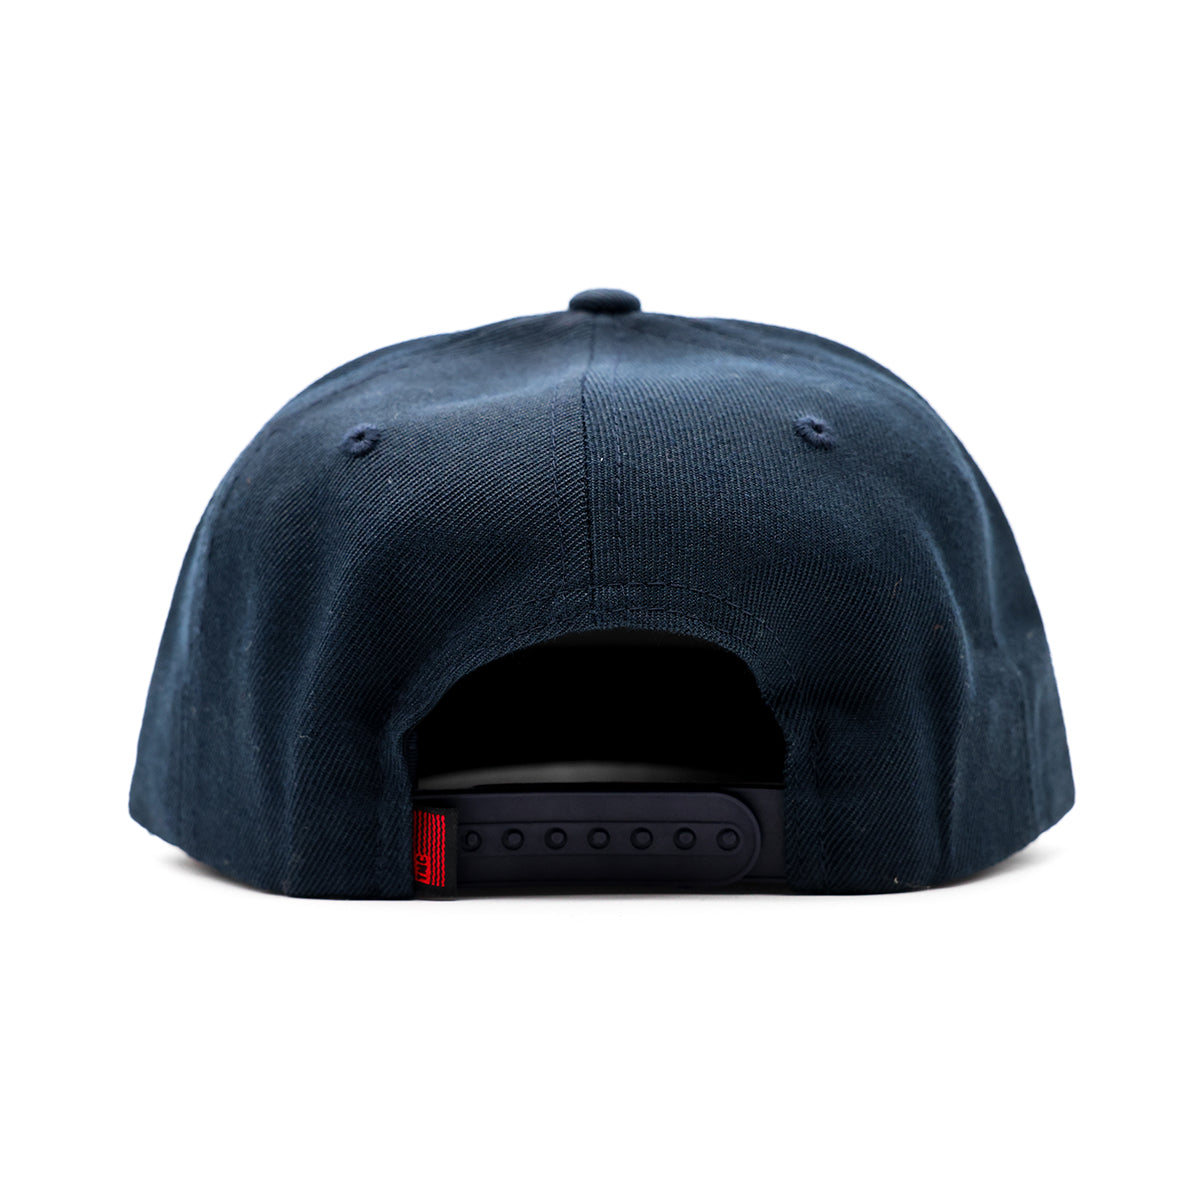 TMC Flag Patch Limited Edition Snapback - Navy/Red/White - Back